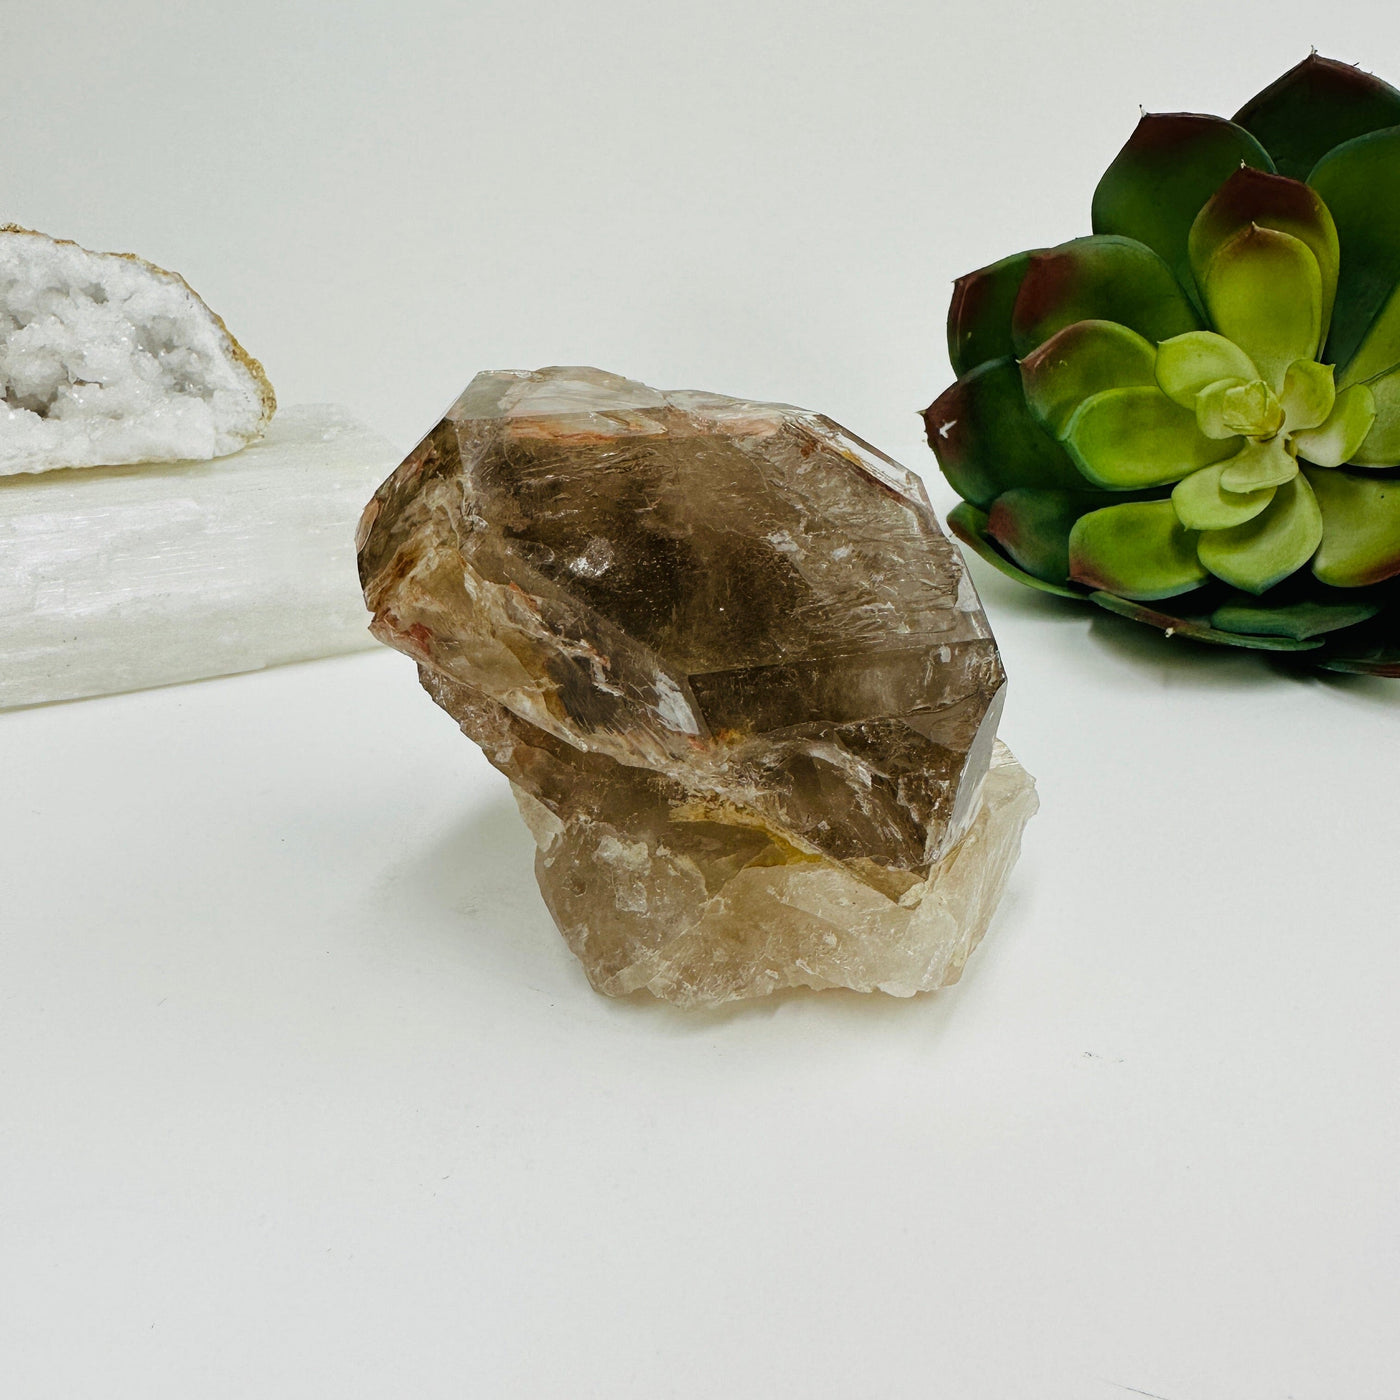 Smokey quartz cluster with decorations in the background